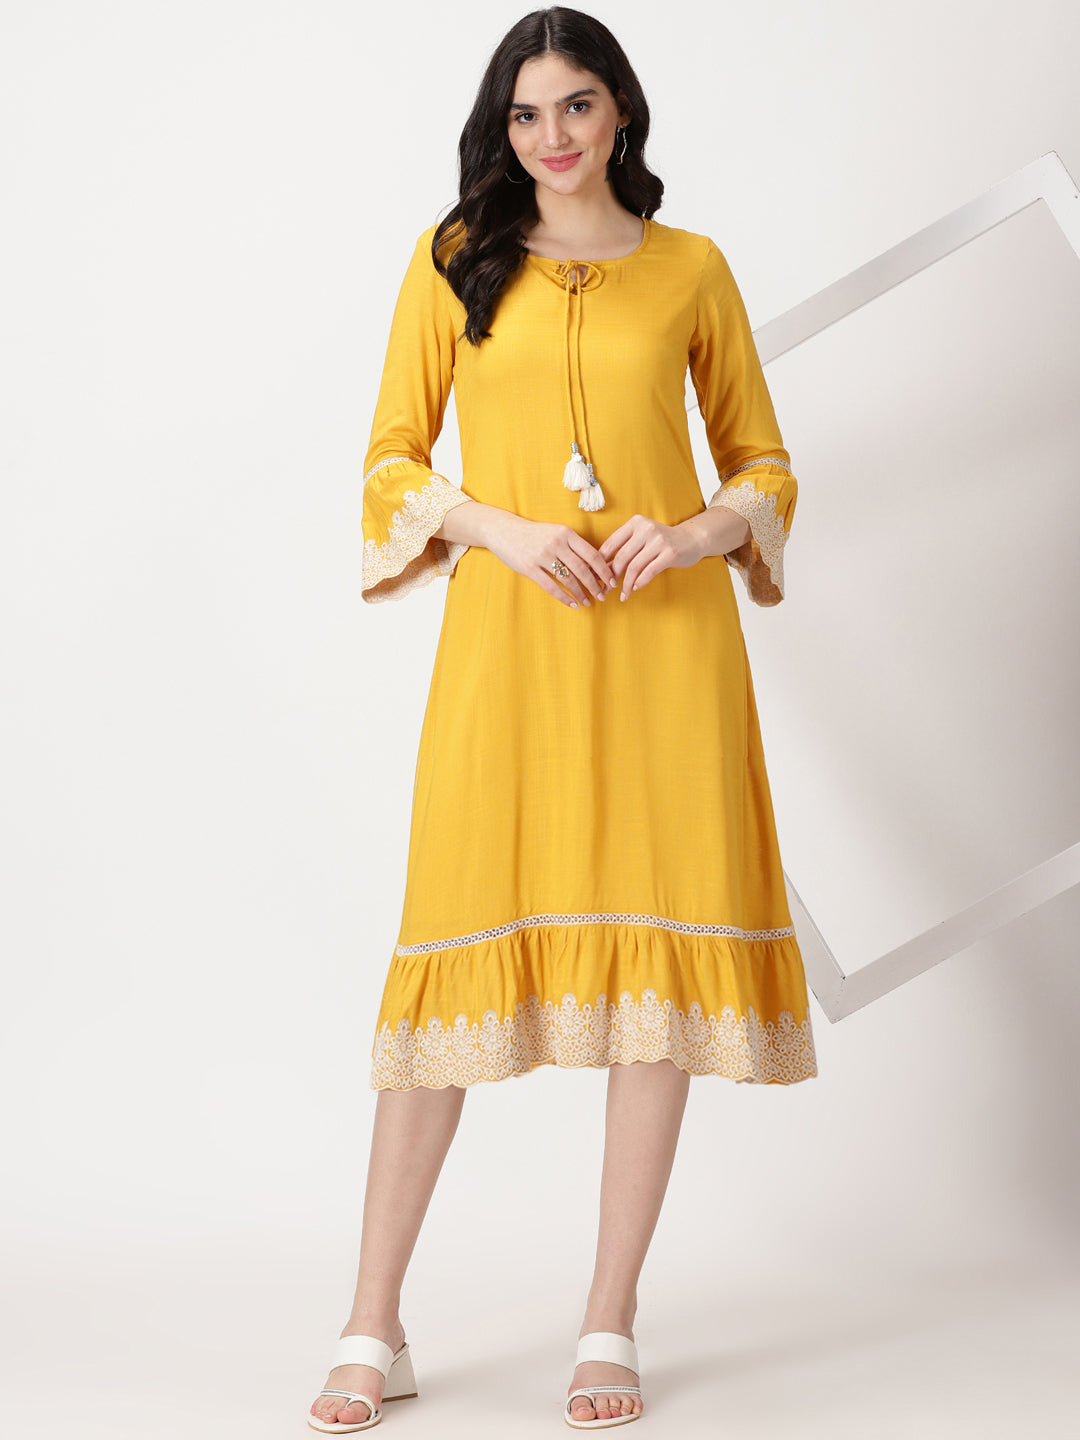 Yellow Rayon Slub Midi Dress with Lace Embroidered Details